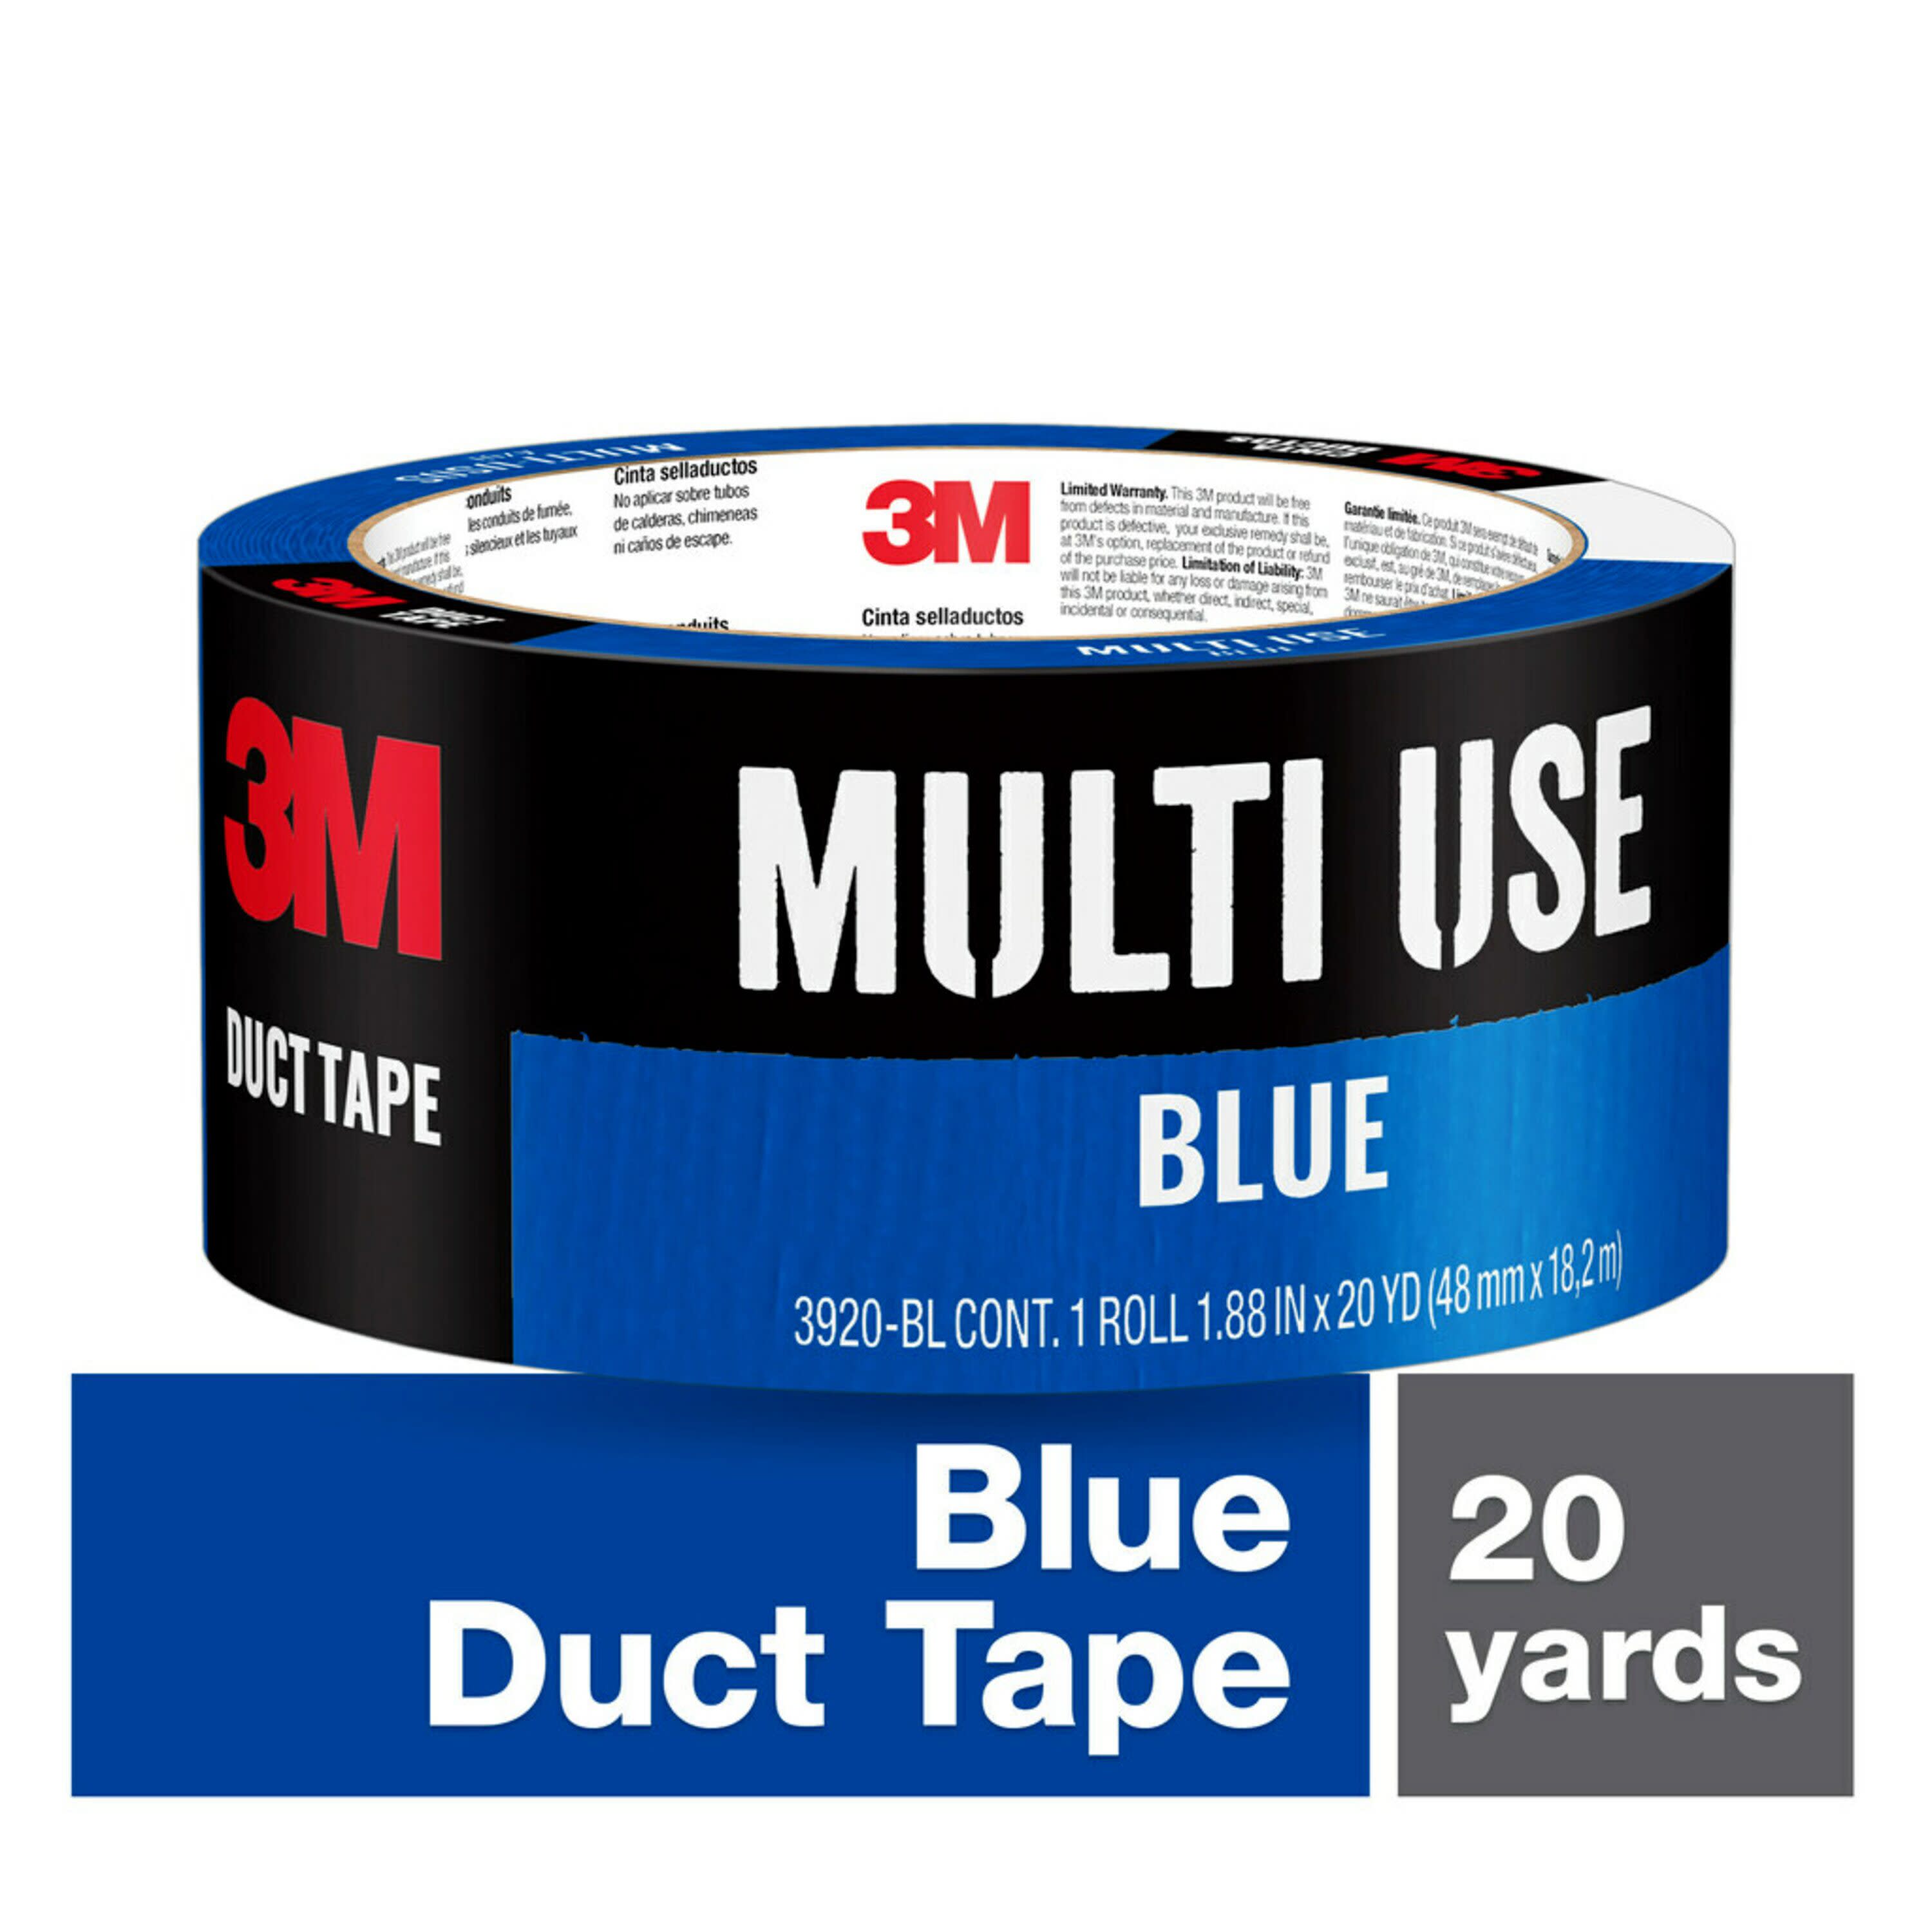 Navy Blue Duct Tape- 2 Inches X 45 Yards, Heavy Duty Duct Tape